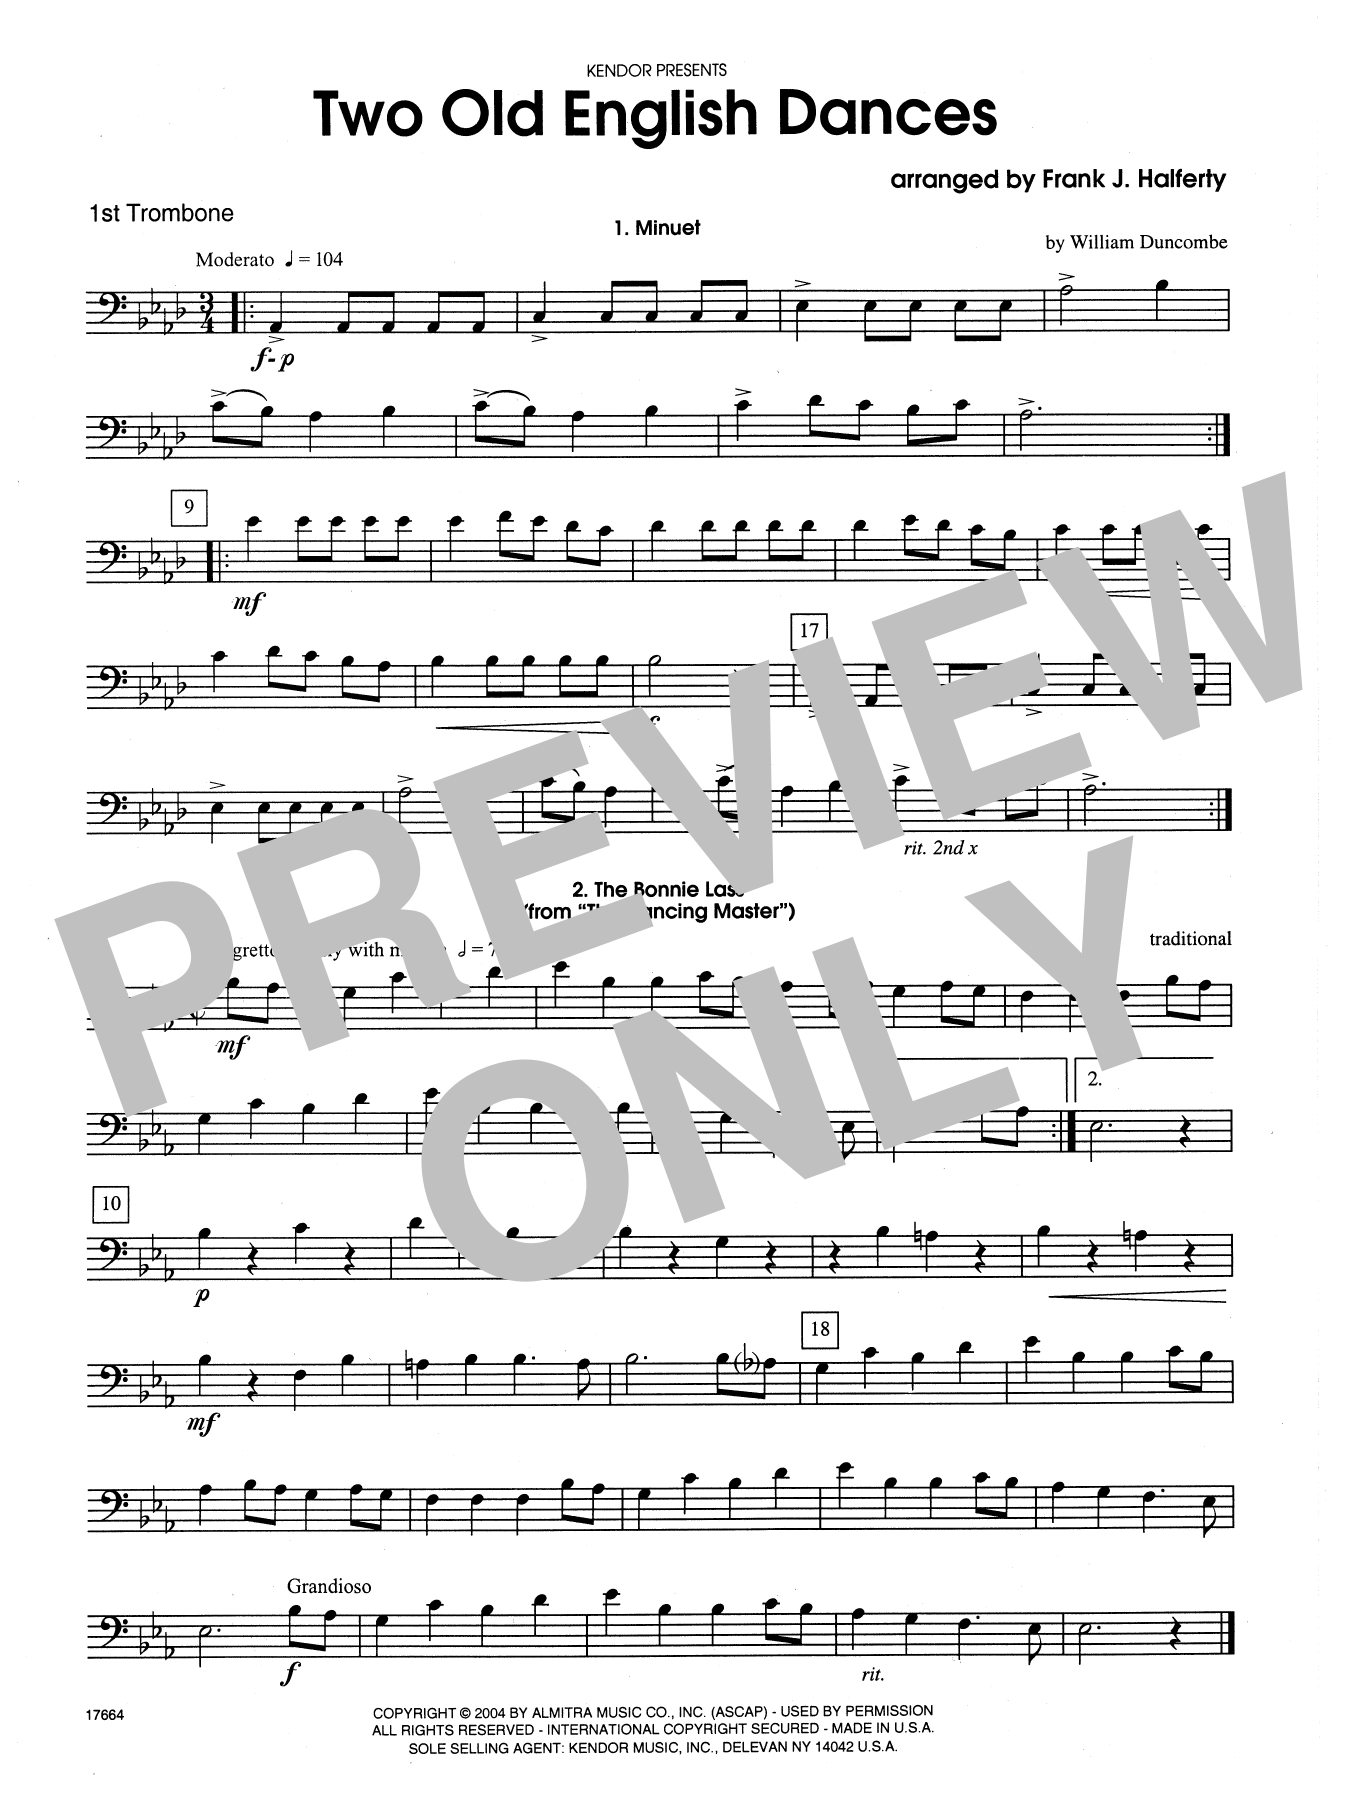 Frank J. Halferty Two Old English Dances - 1st Trombone sheet music notes and chords. Download Printable PDF.